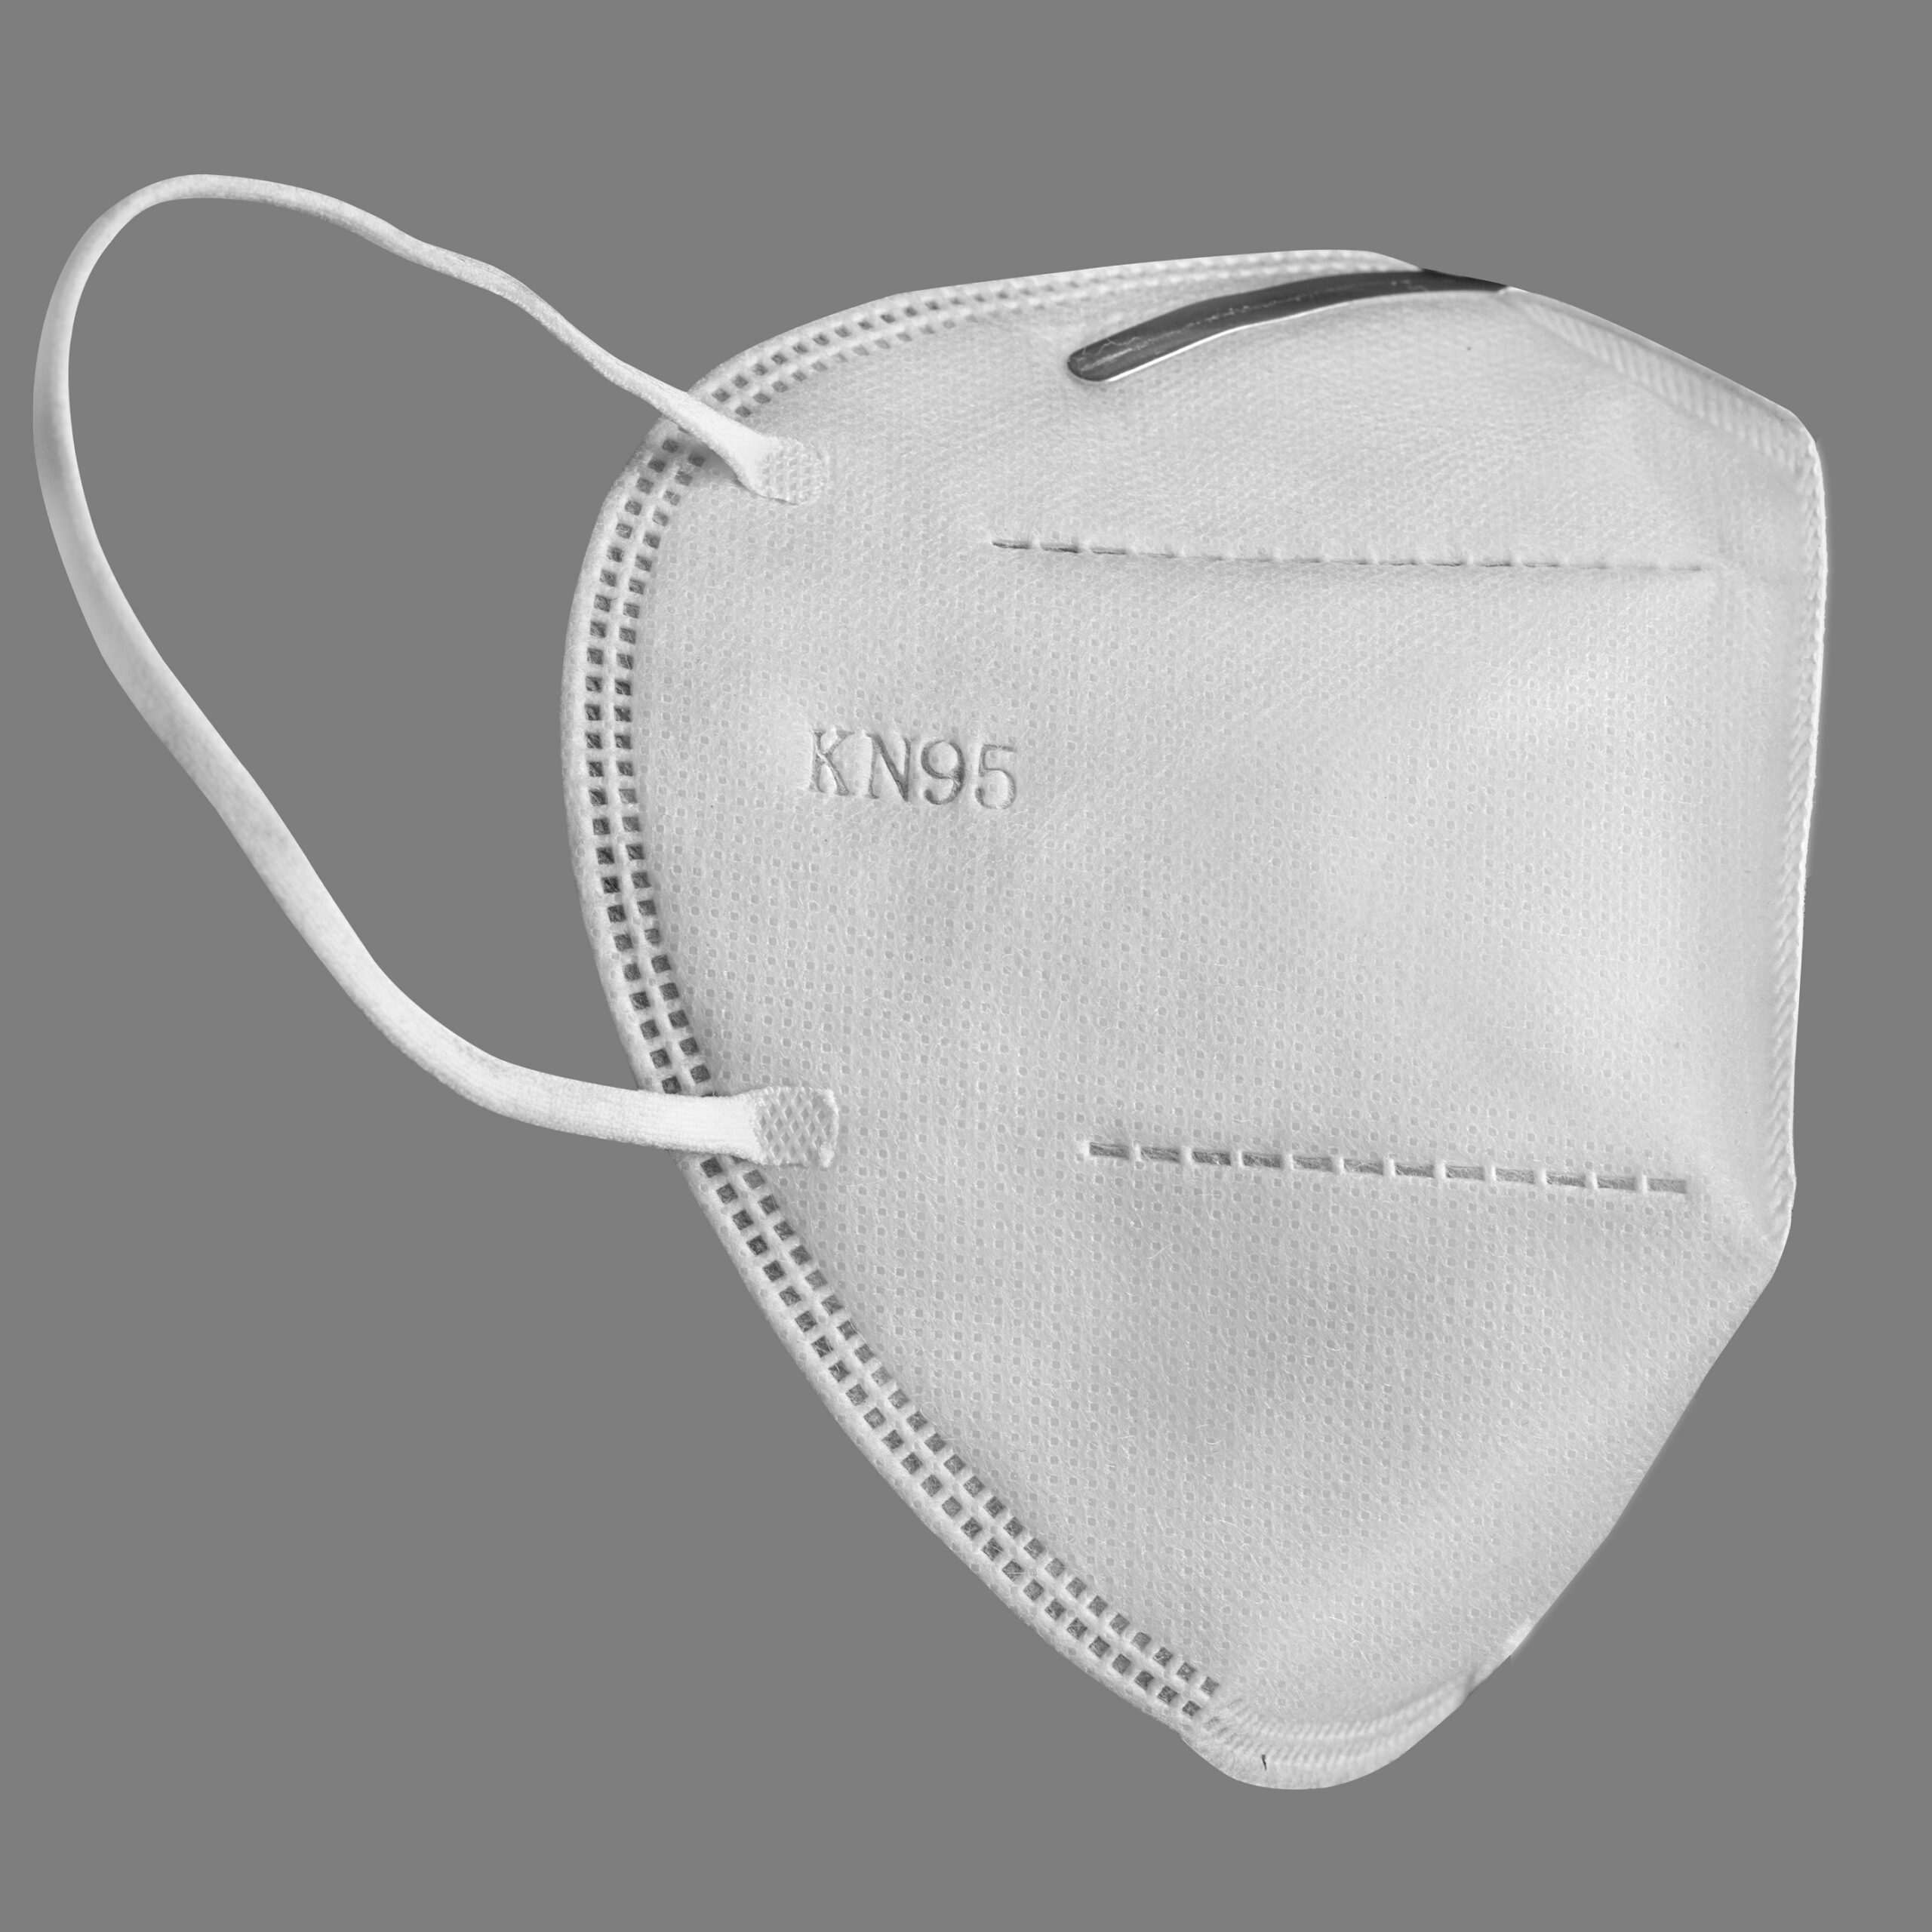 Kn95 Ffp2 Respirator Mask With Earloops Africa Medical Supplies